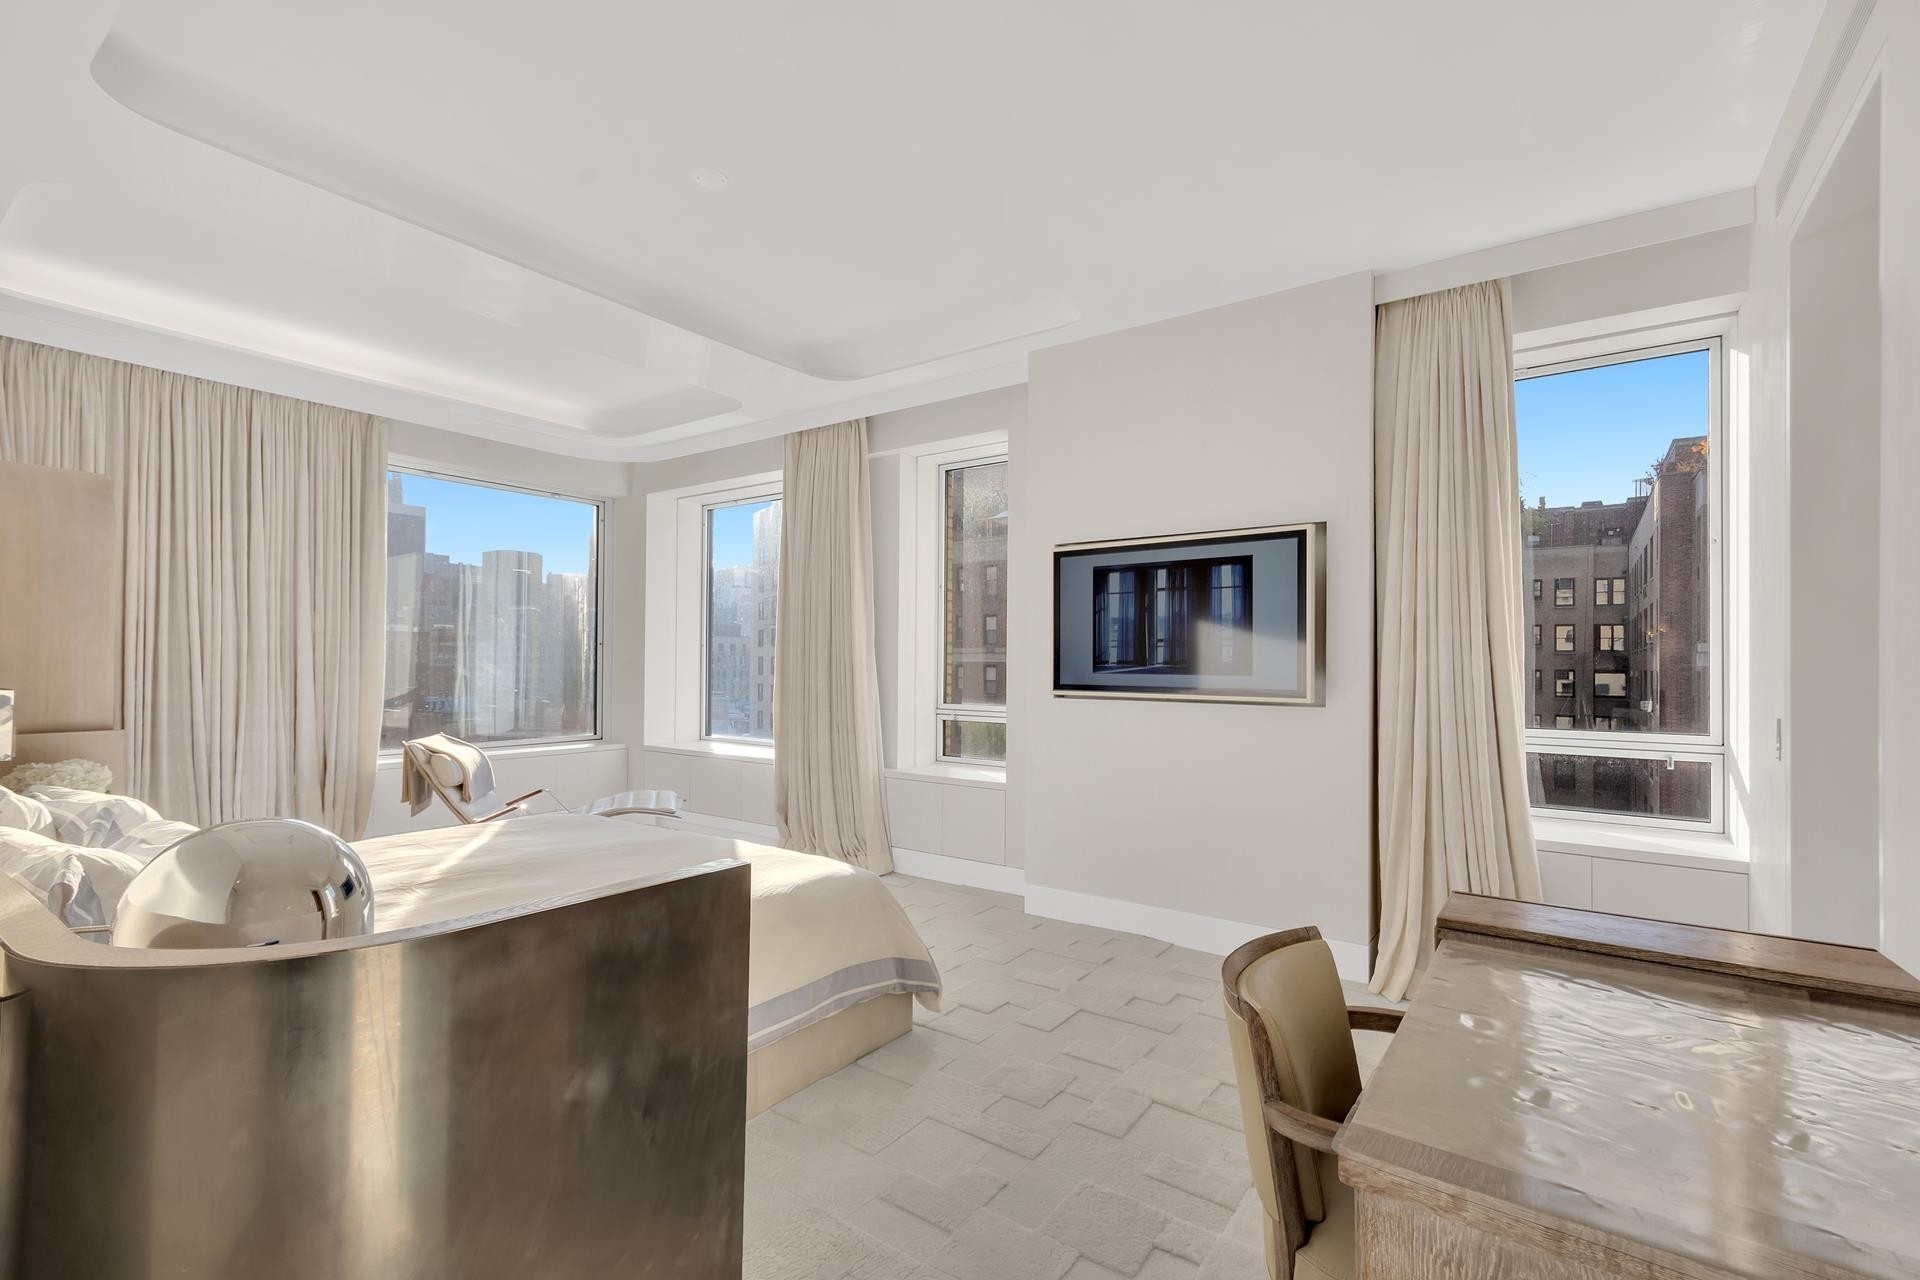 10. Co-op Properties for Sale at 730 PARK AVE, 10/11C Lenox Hill, New York, NY 10021